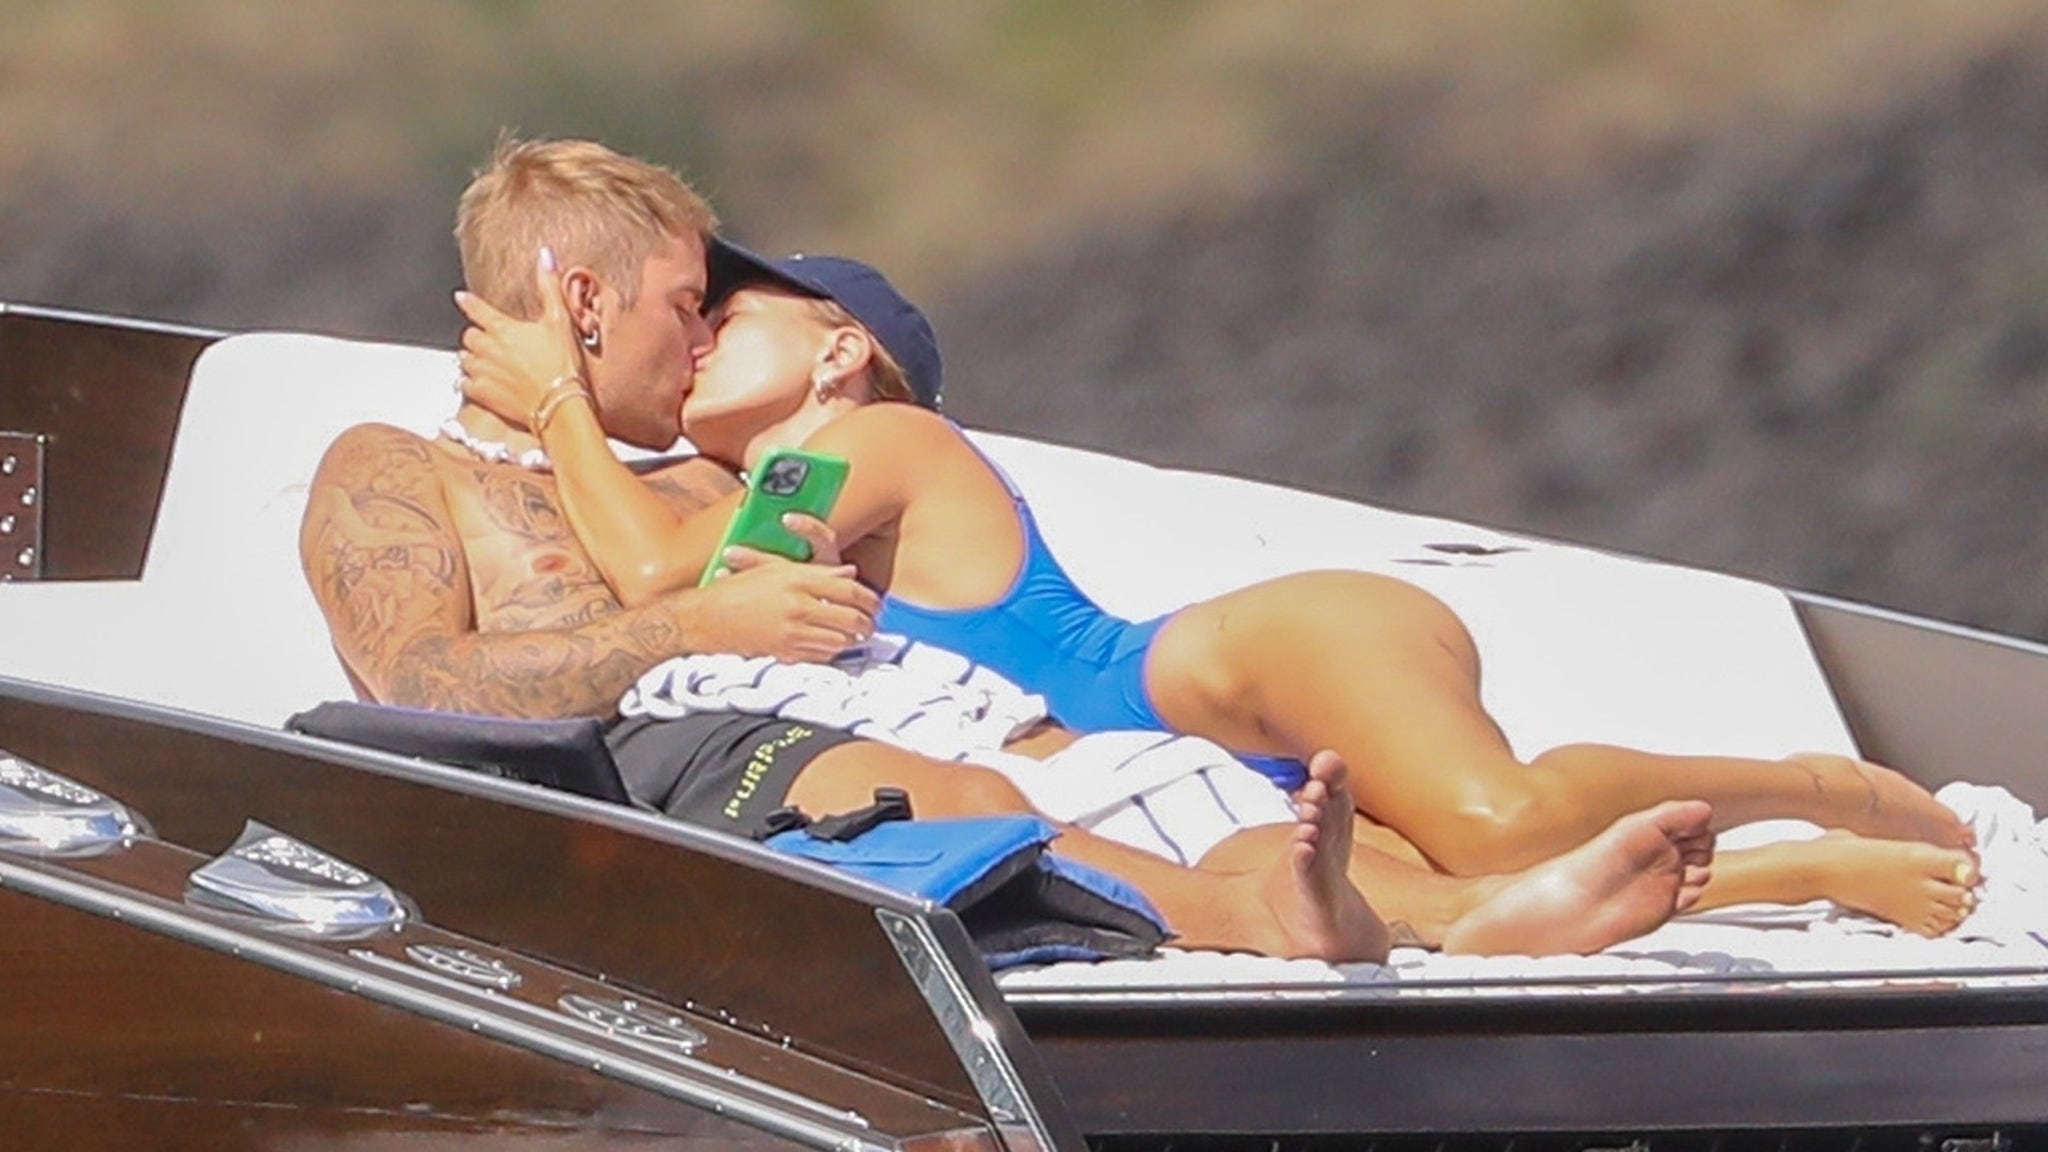 Justin Bieber and Hailey Bieber Loved Up on a Boat as He Continues Recovery #JustinBieber